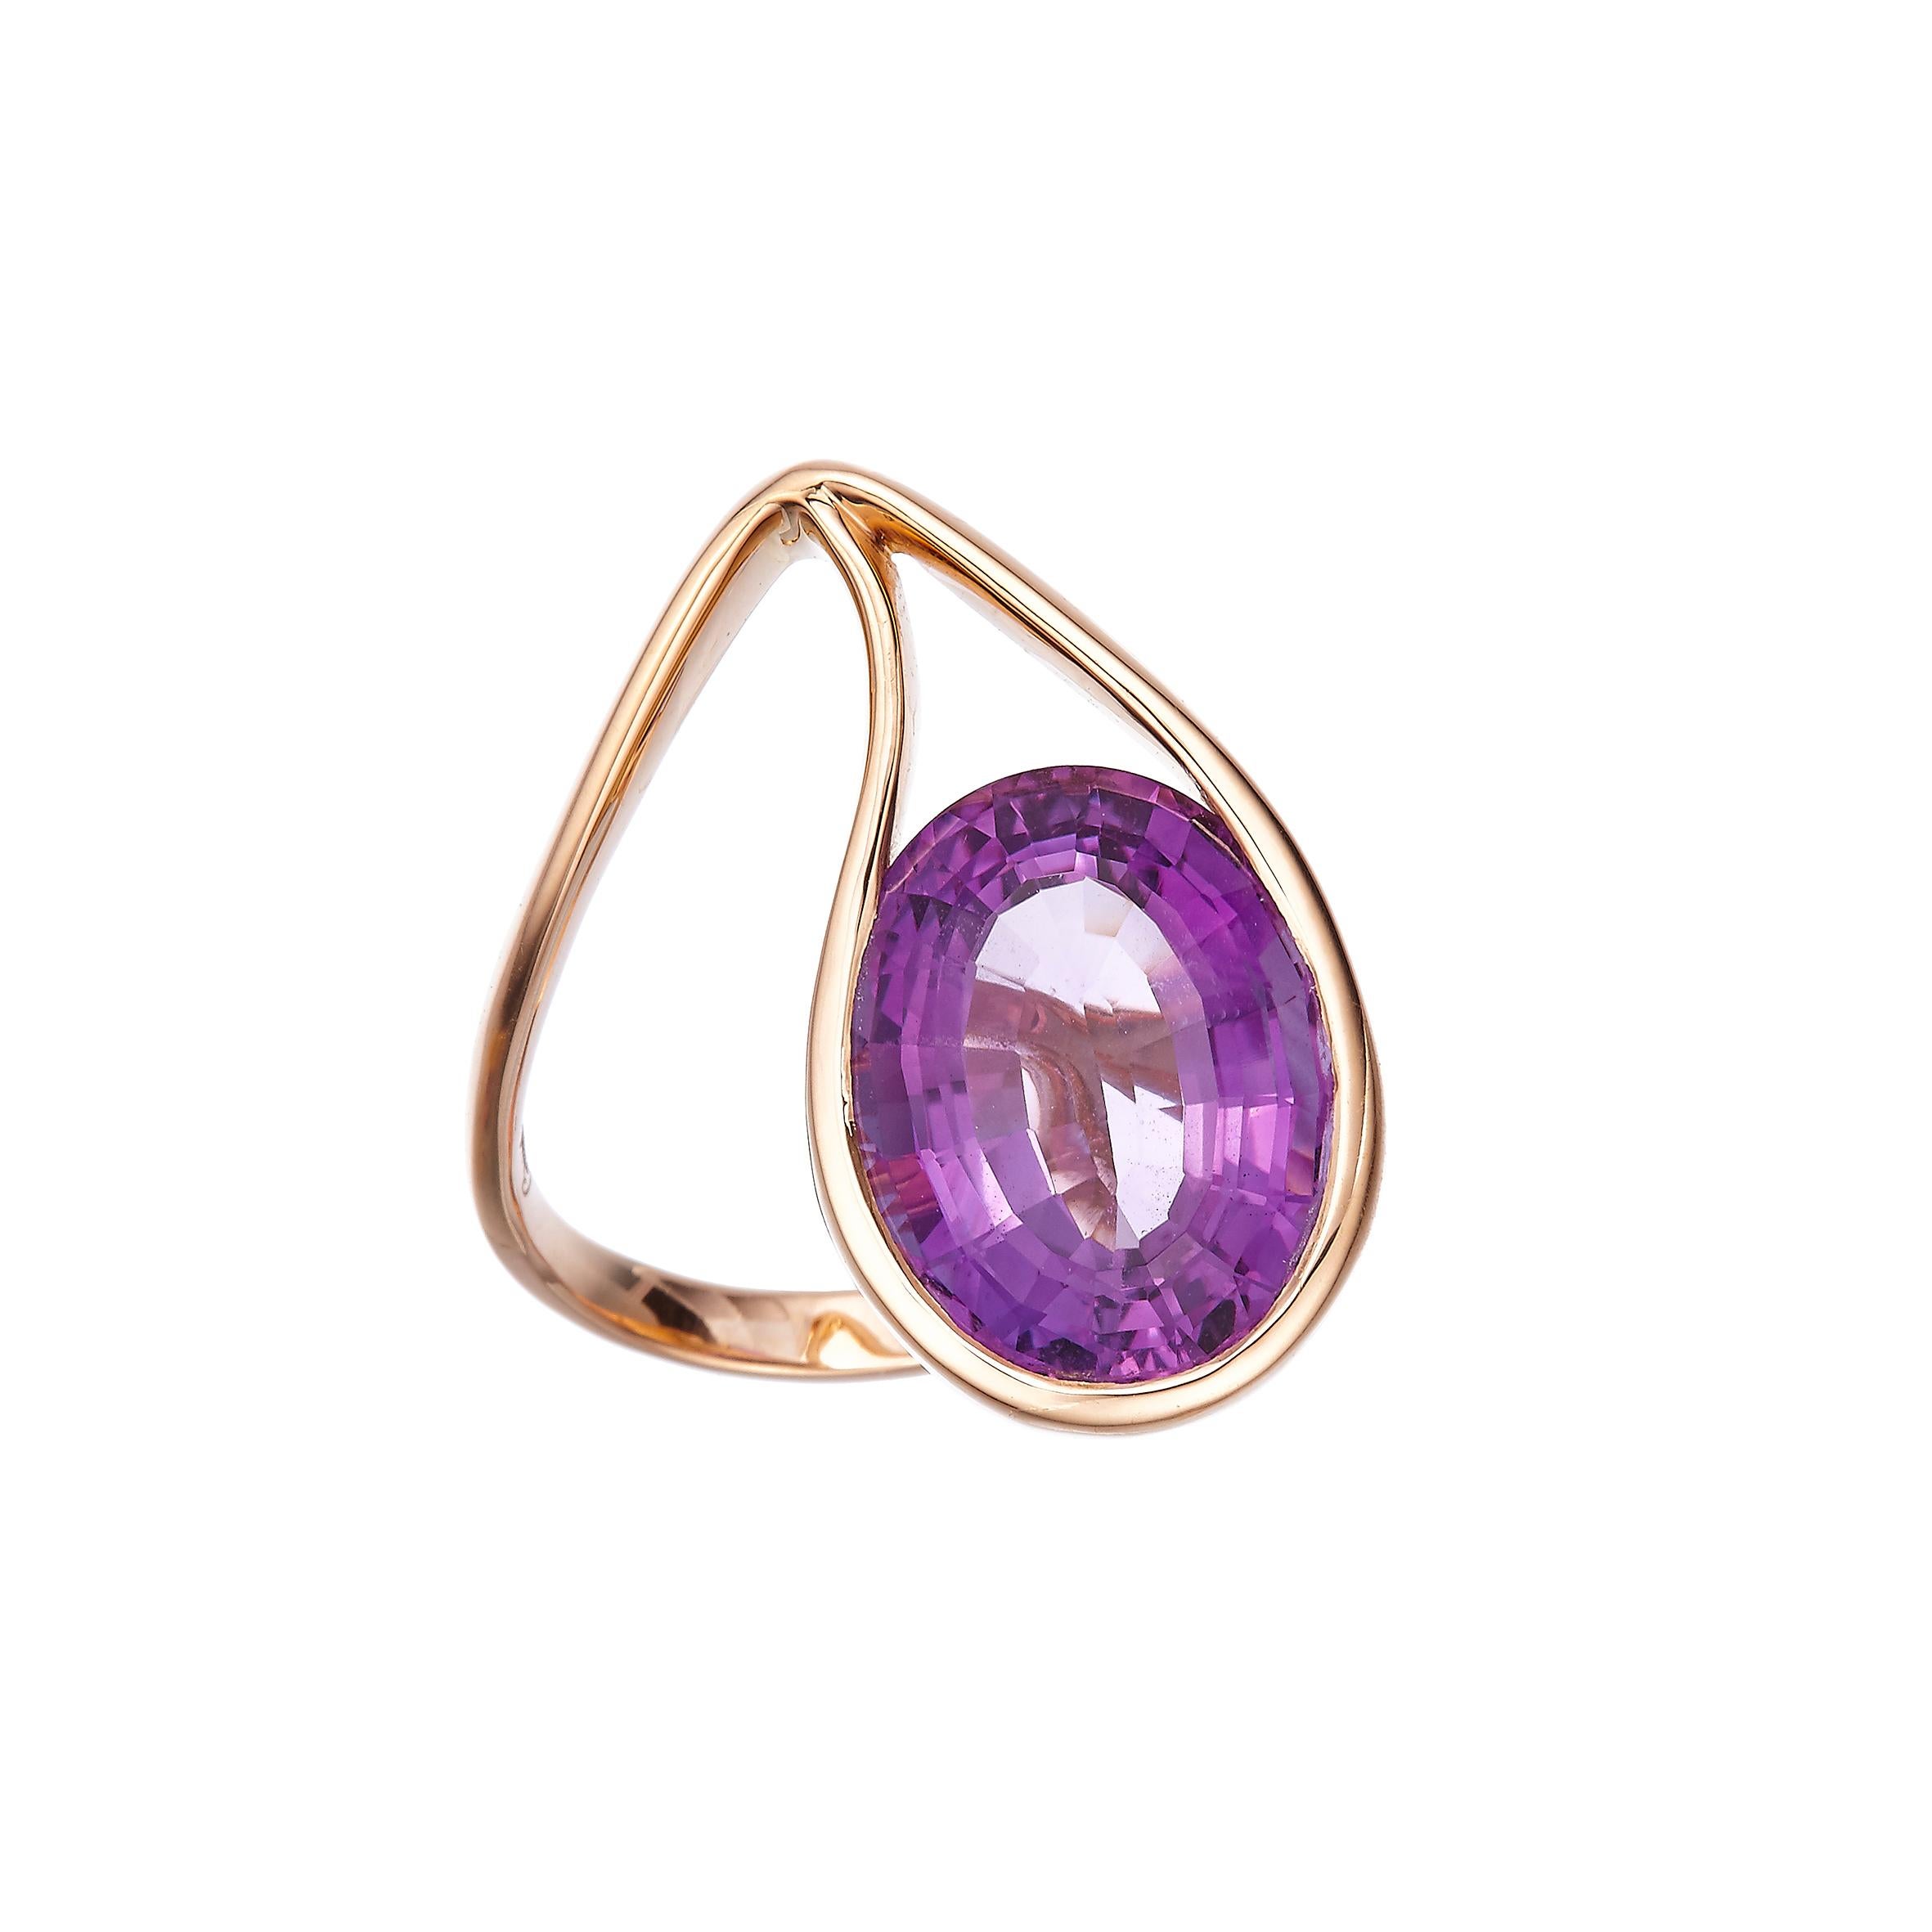 For Sale:  18K Rose Gold Made in Italy Design Innovatively Worn Citrine Cocktail Ring 11